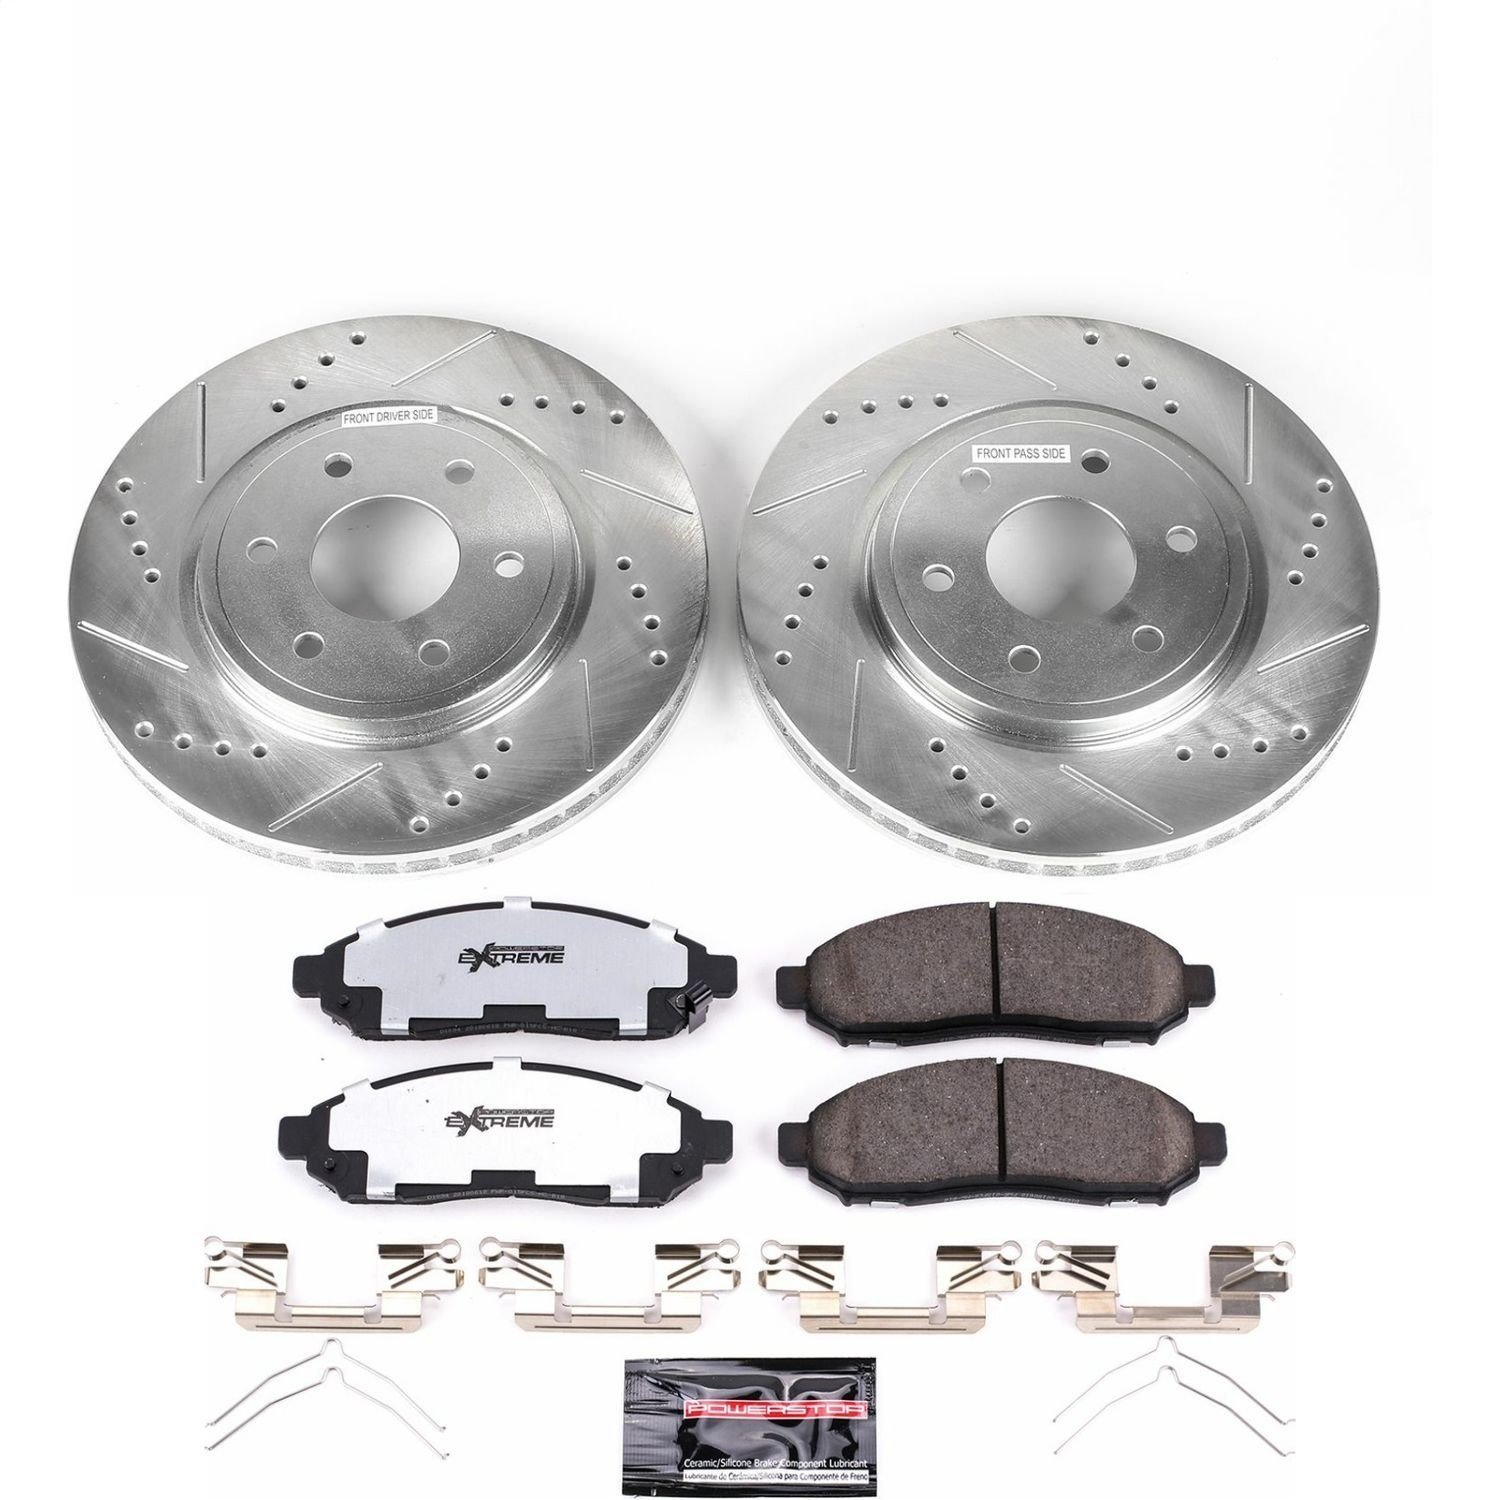 Truck and Tow Z36 Front Brake Pad and Rotor Kit Fits Select 2005-2018 Nissan, Suzuki Models